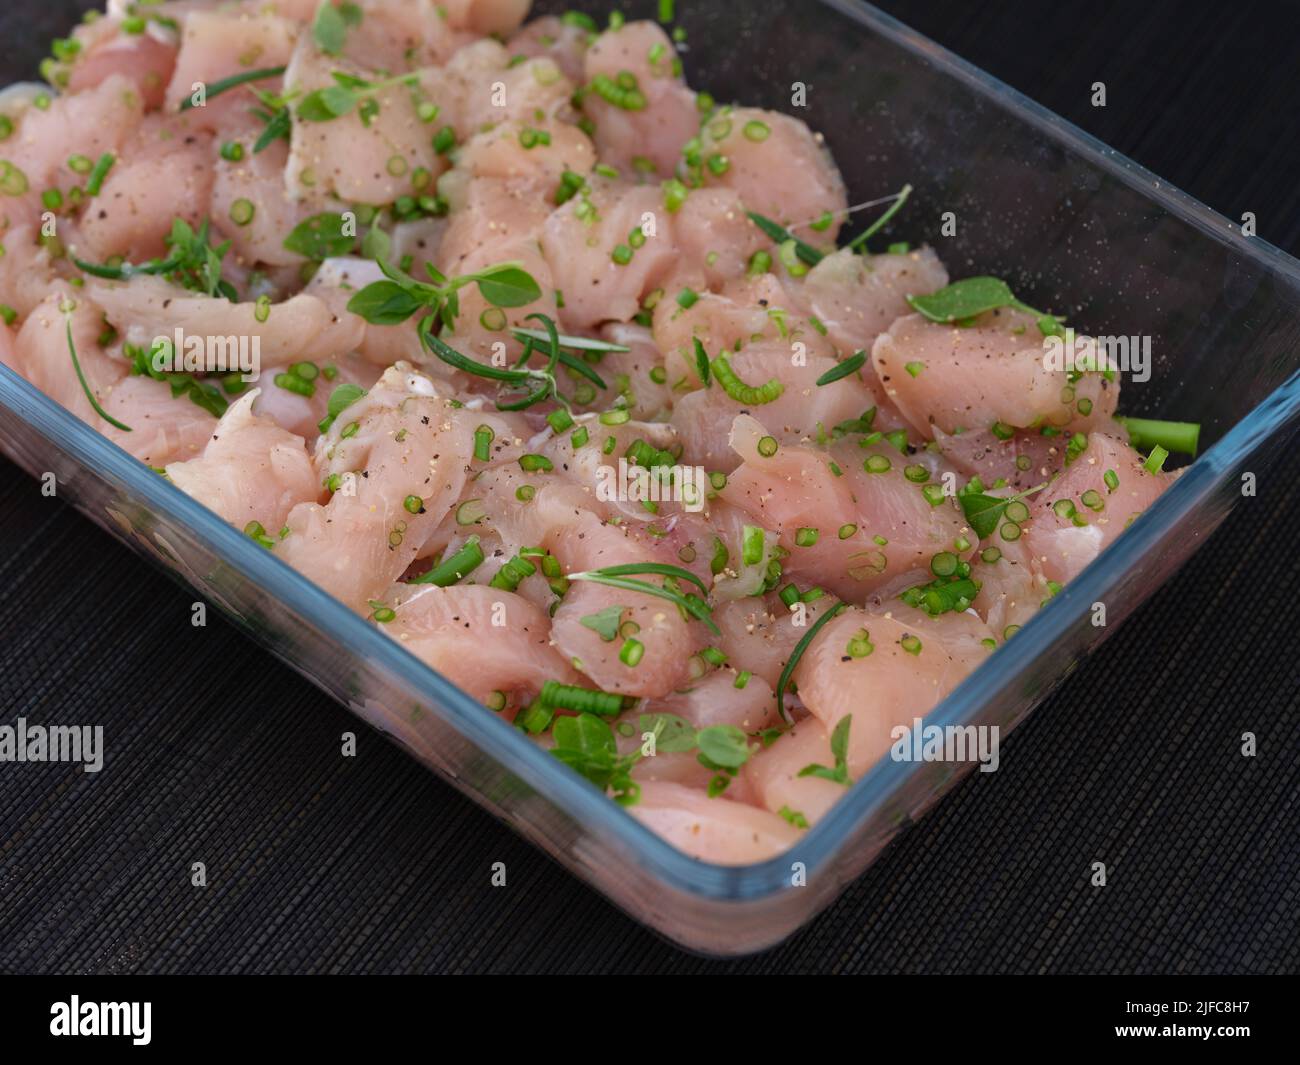 A glass baking tray with raw chicken breast with chopped garlic arrows and basil leaves. Close up. Stock Photo